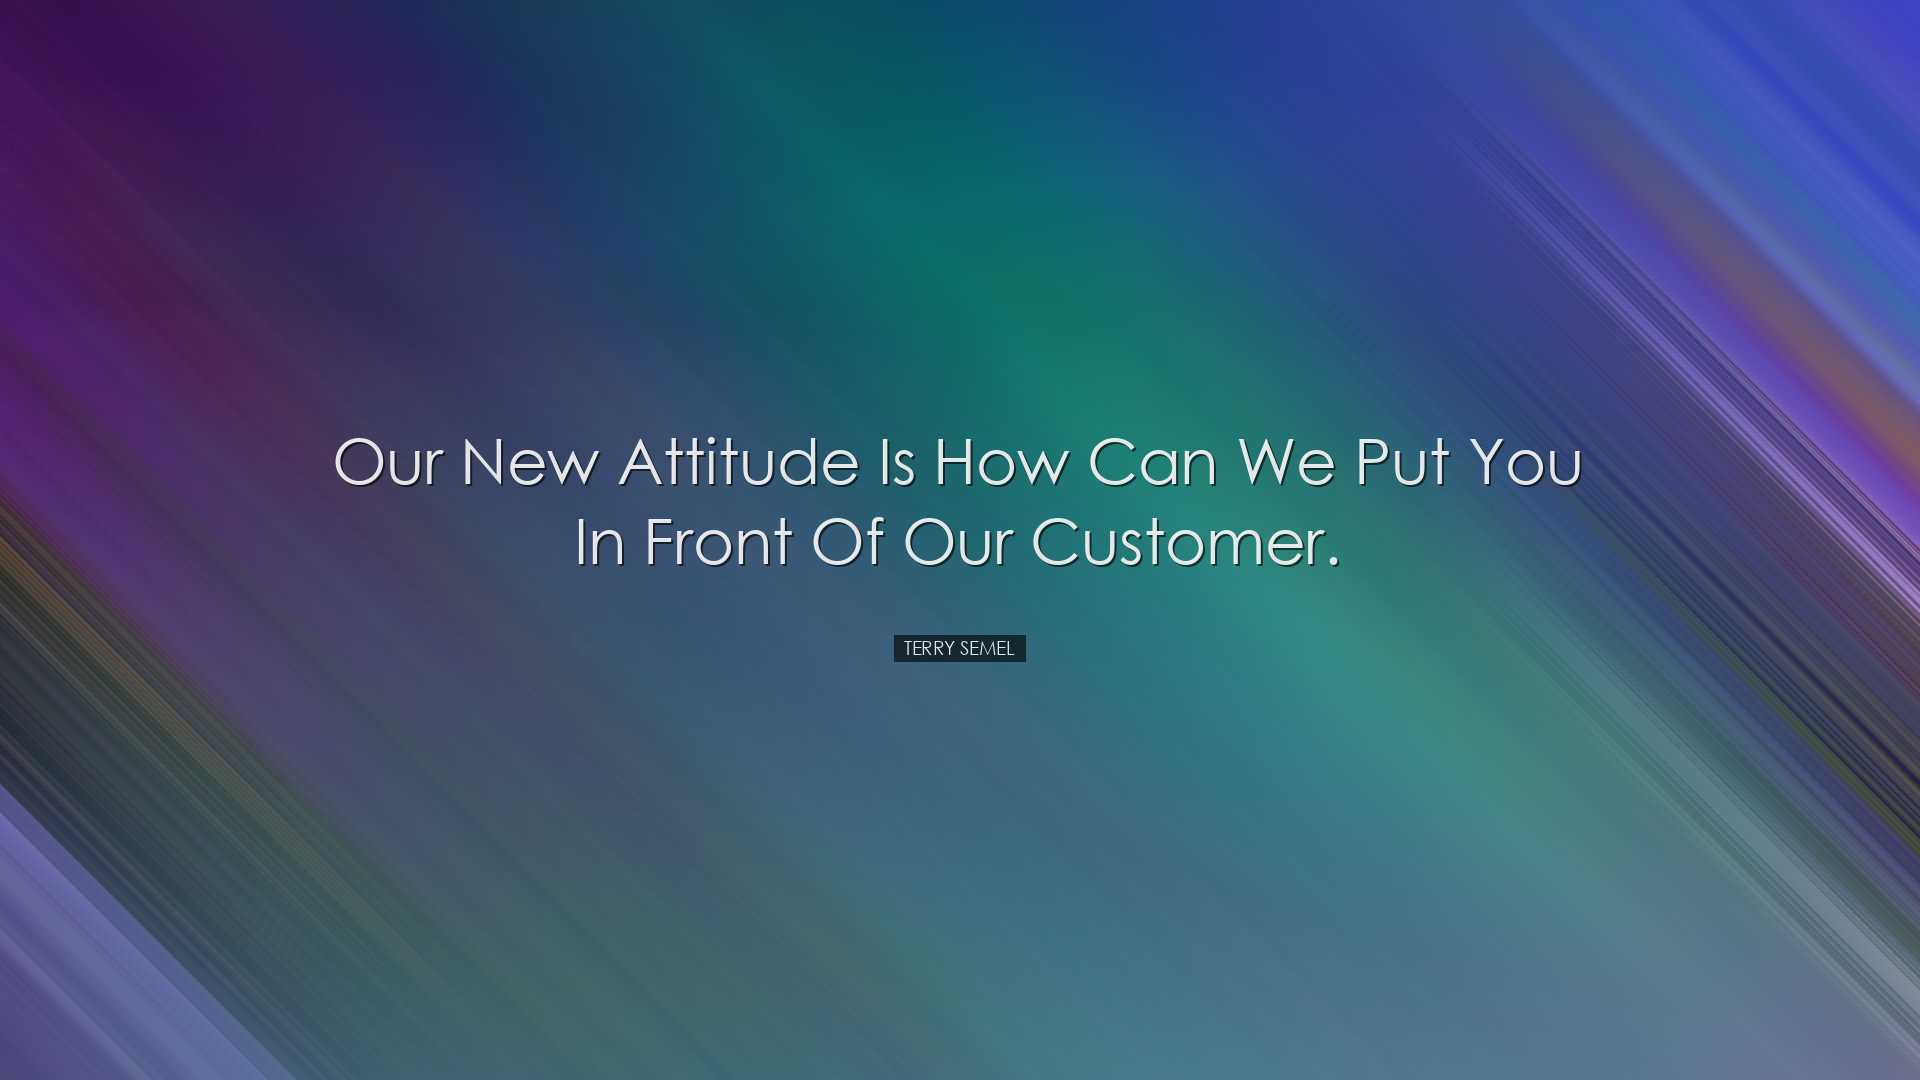 Our new attitude is how can we put you in front of our customer. -